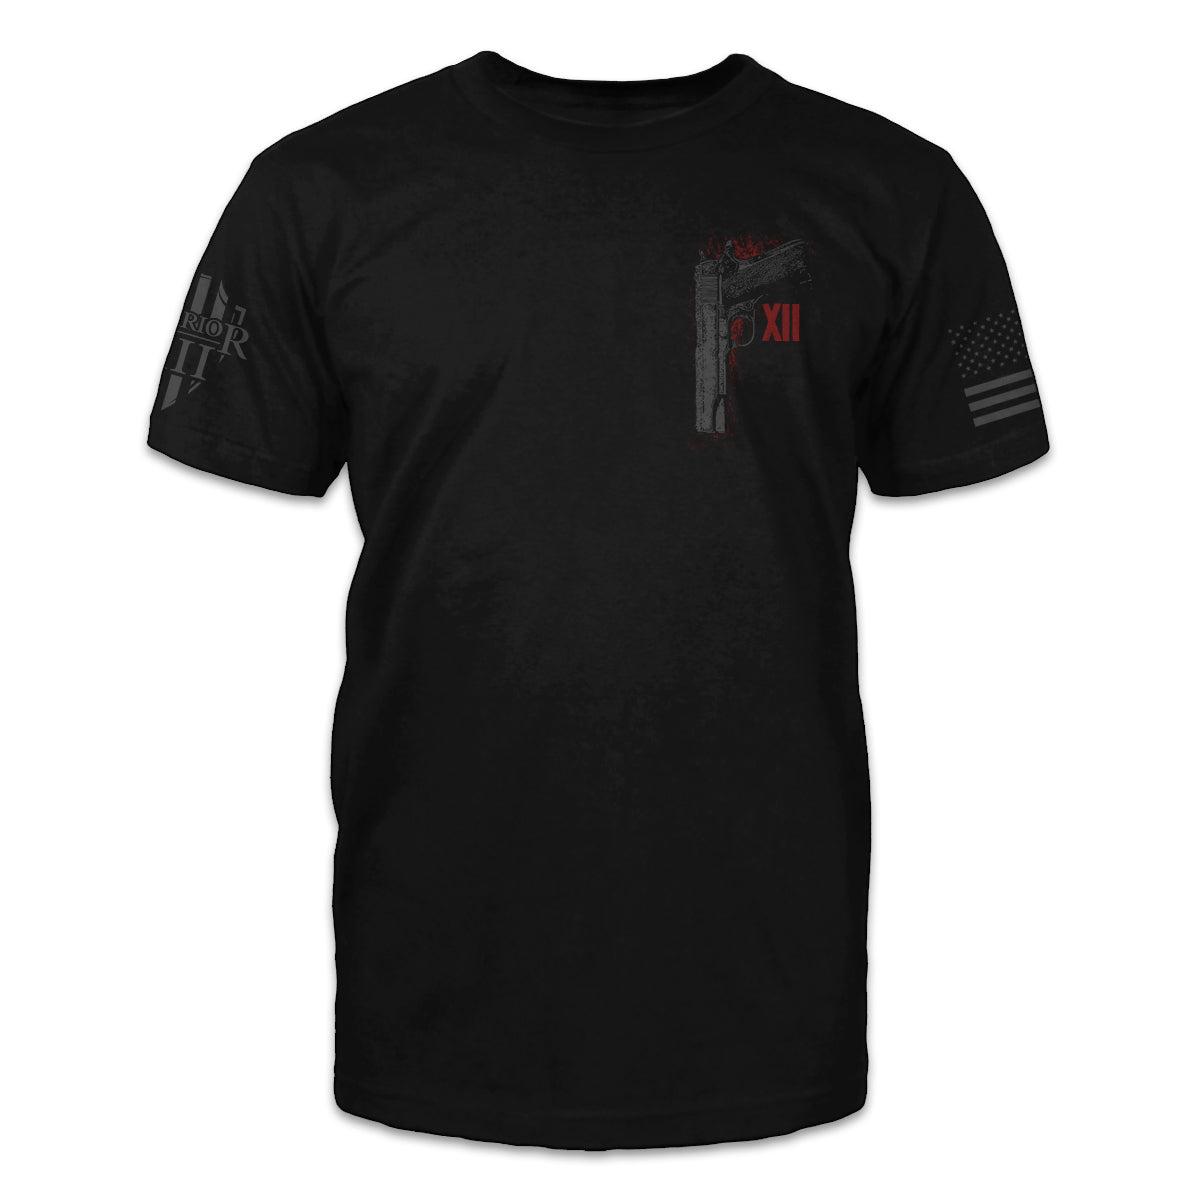 The front of a black t-shirt showing a small pocket image of a pistol.